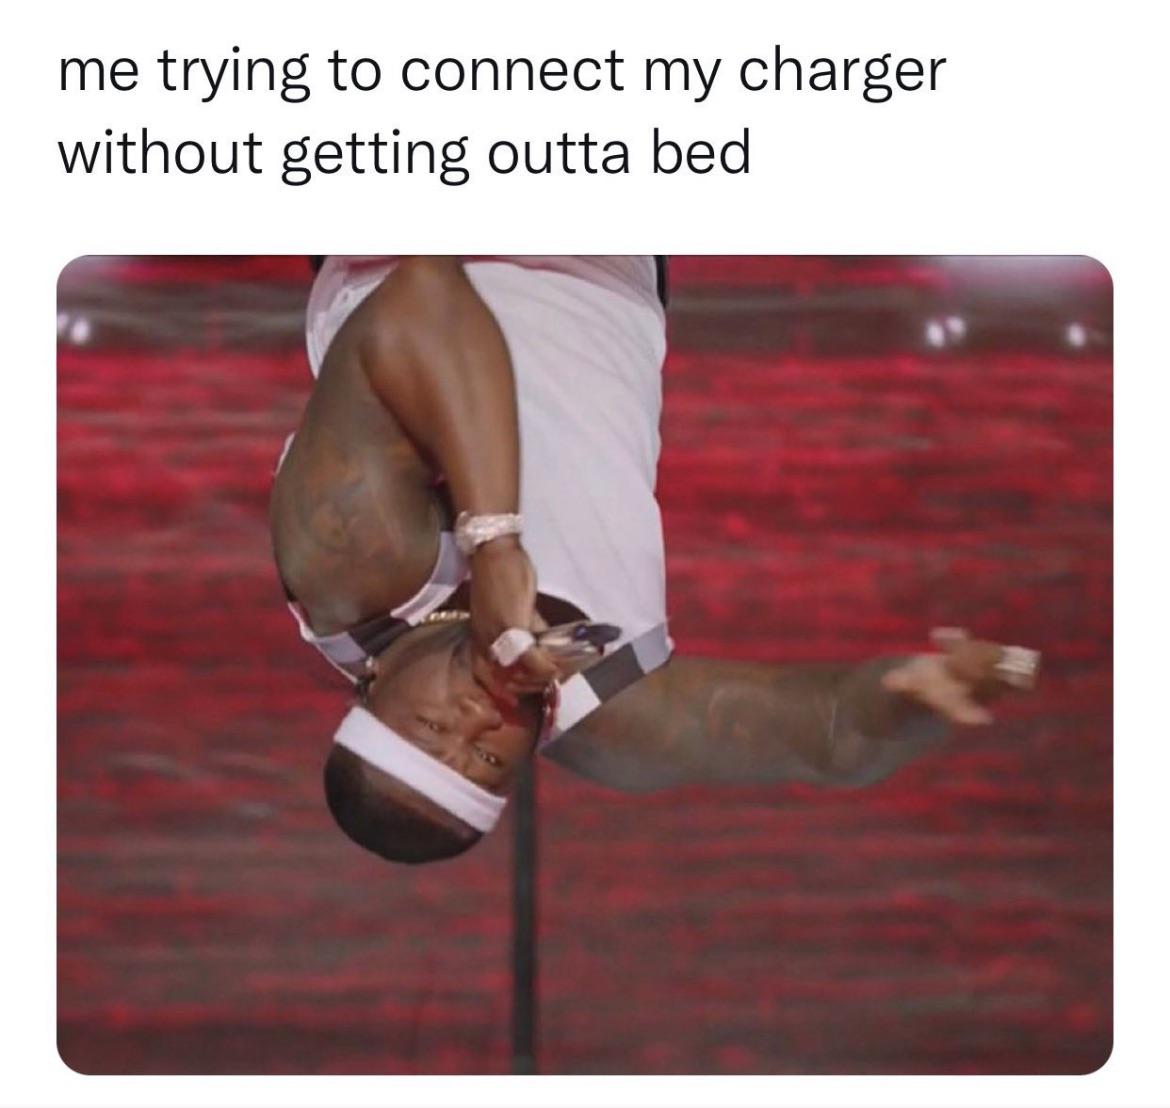 dank memes - funny memes - Super Bowl - me trying to connect my charger without getting outta bed